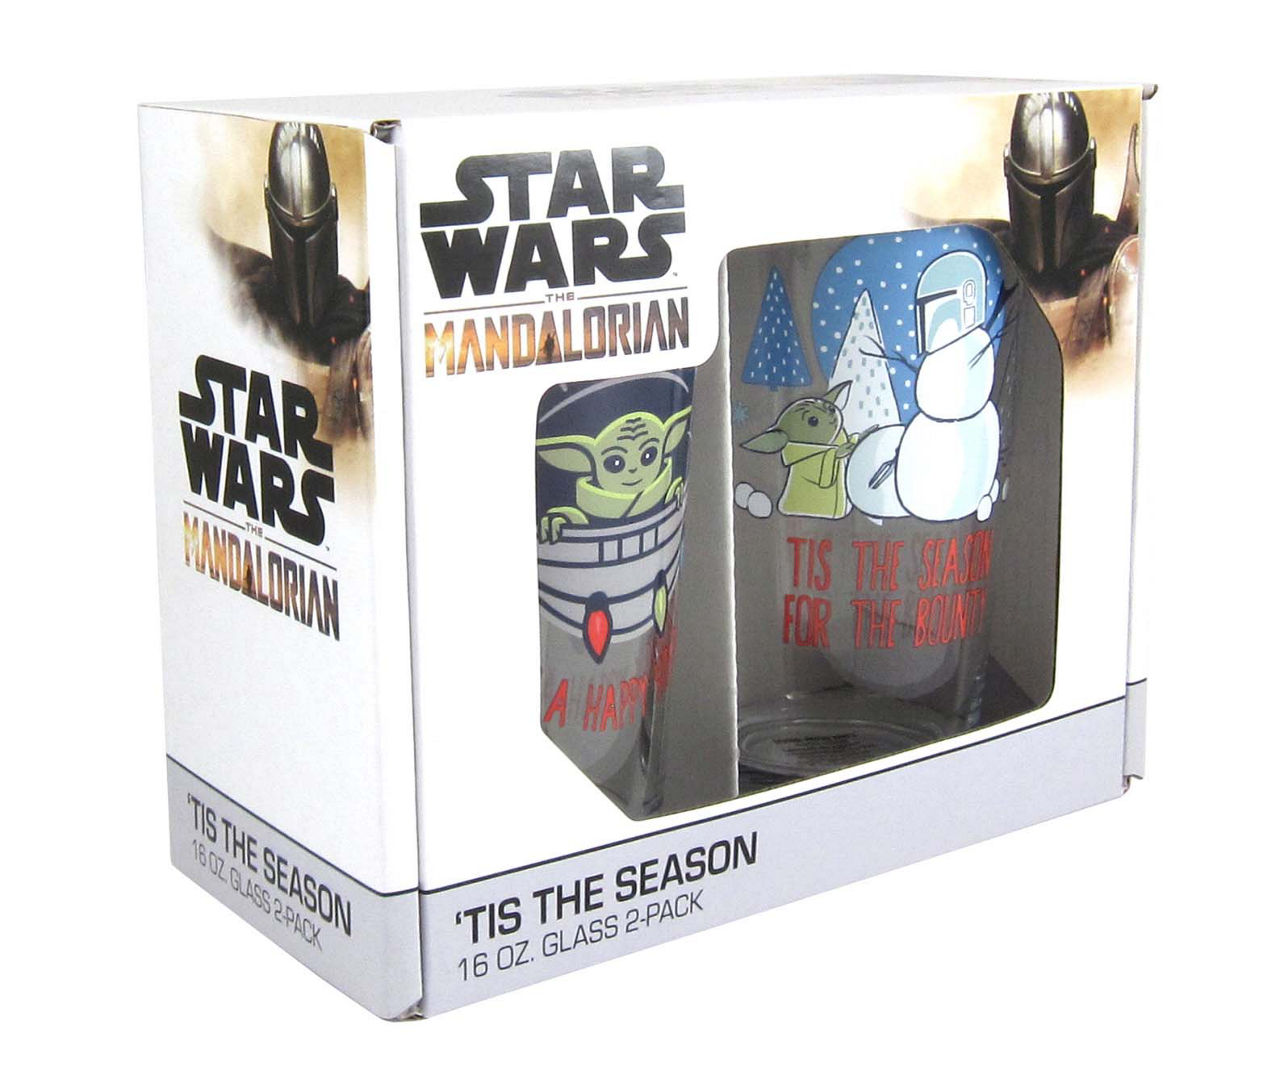 Star Wars Holiday Fun 16-Ounce Pint Glasses | Set of 4